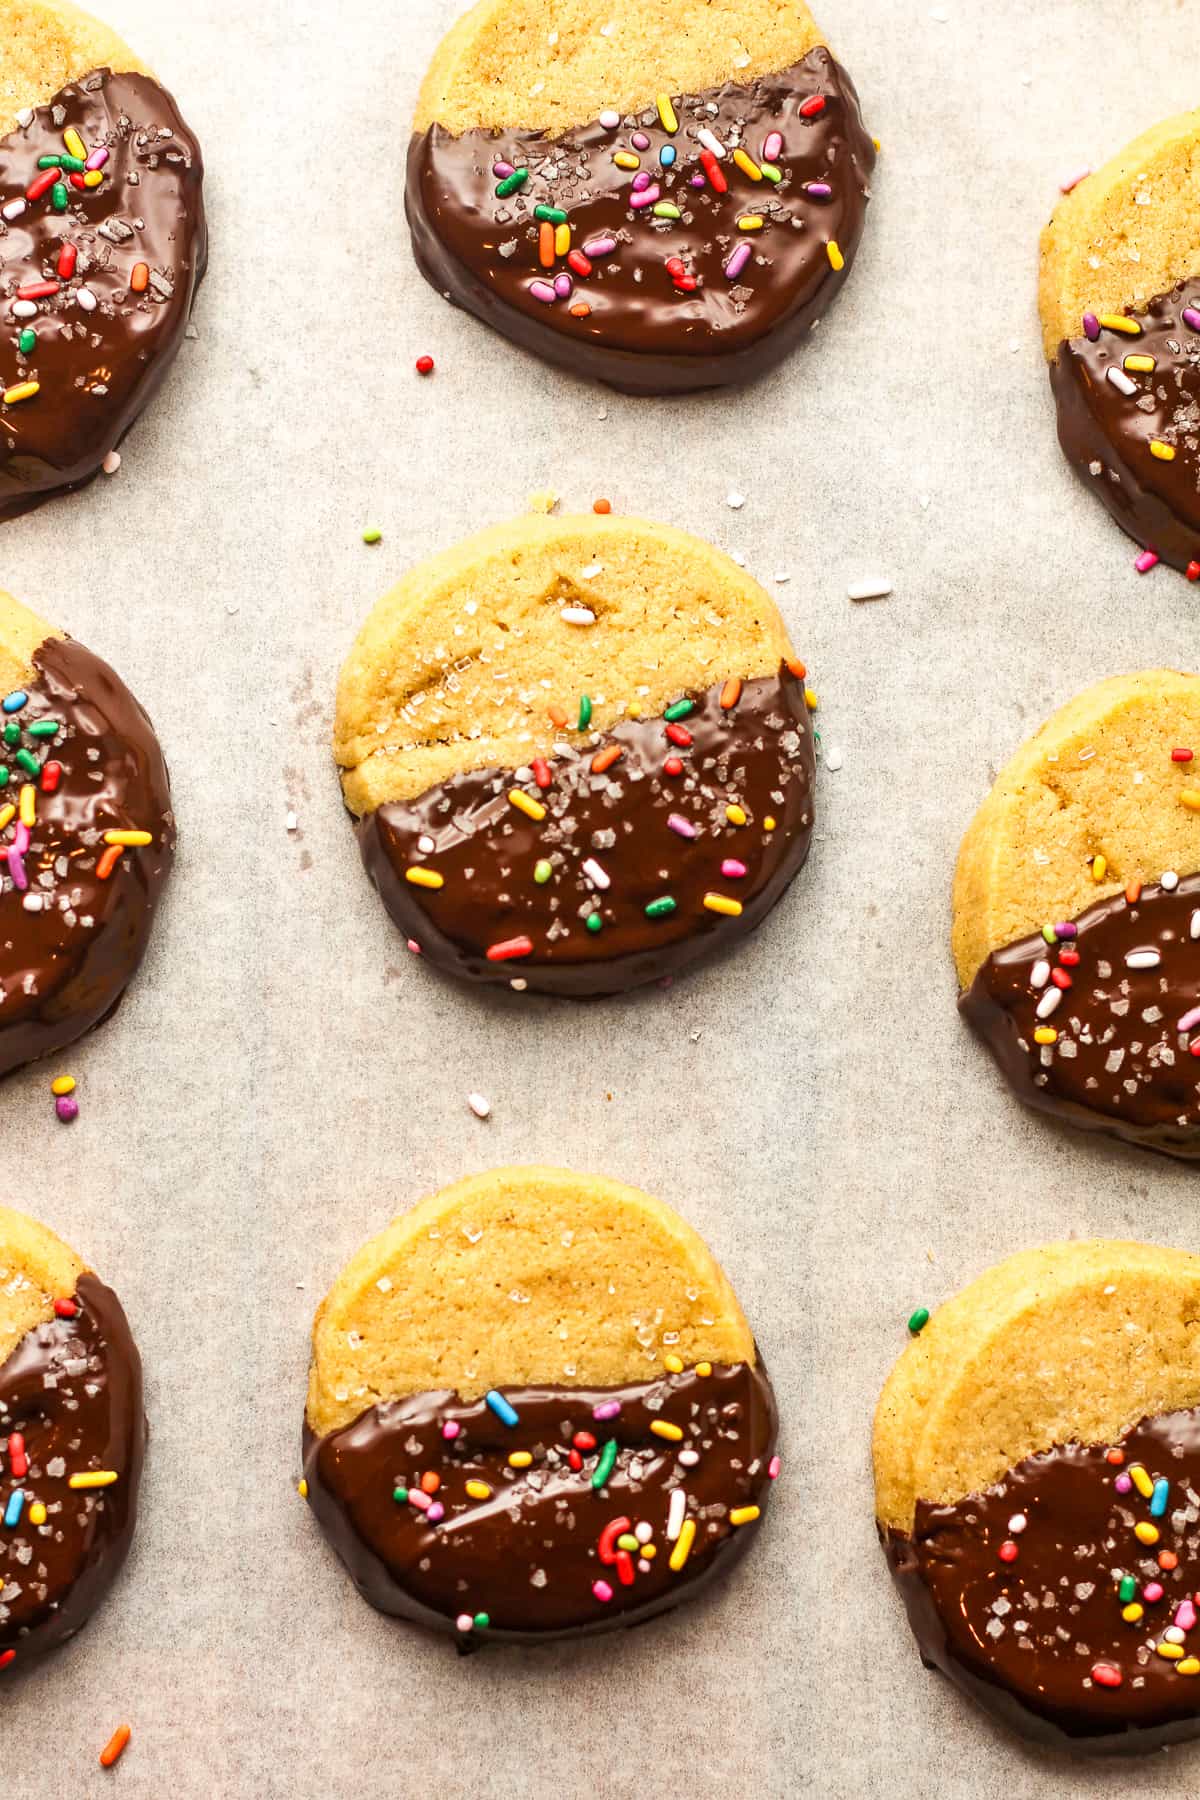 Closeup on some shortbread cookies dipped in chocolate with sprinkles.